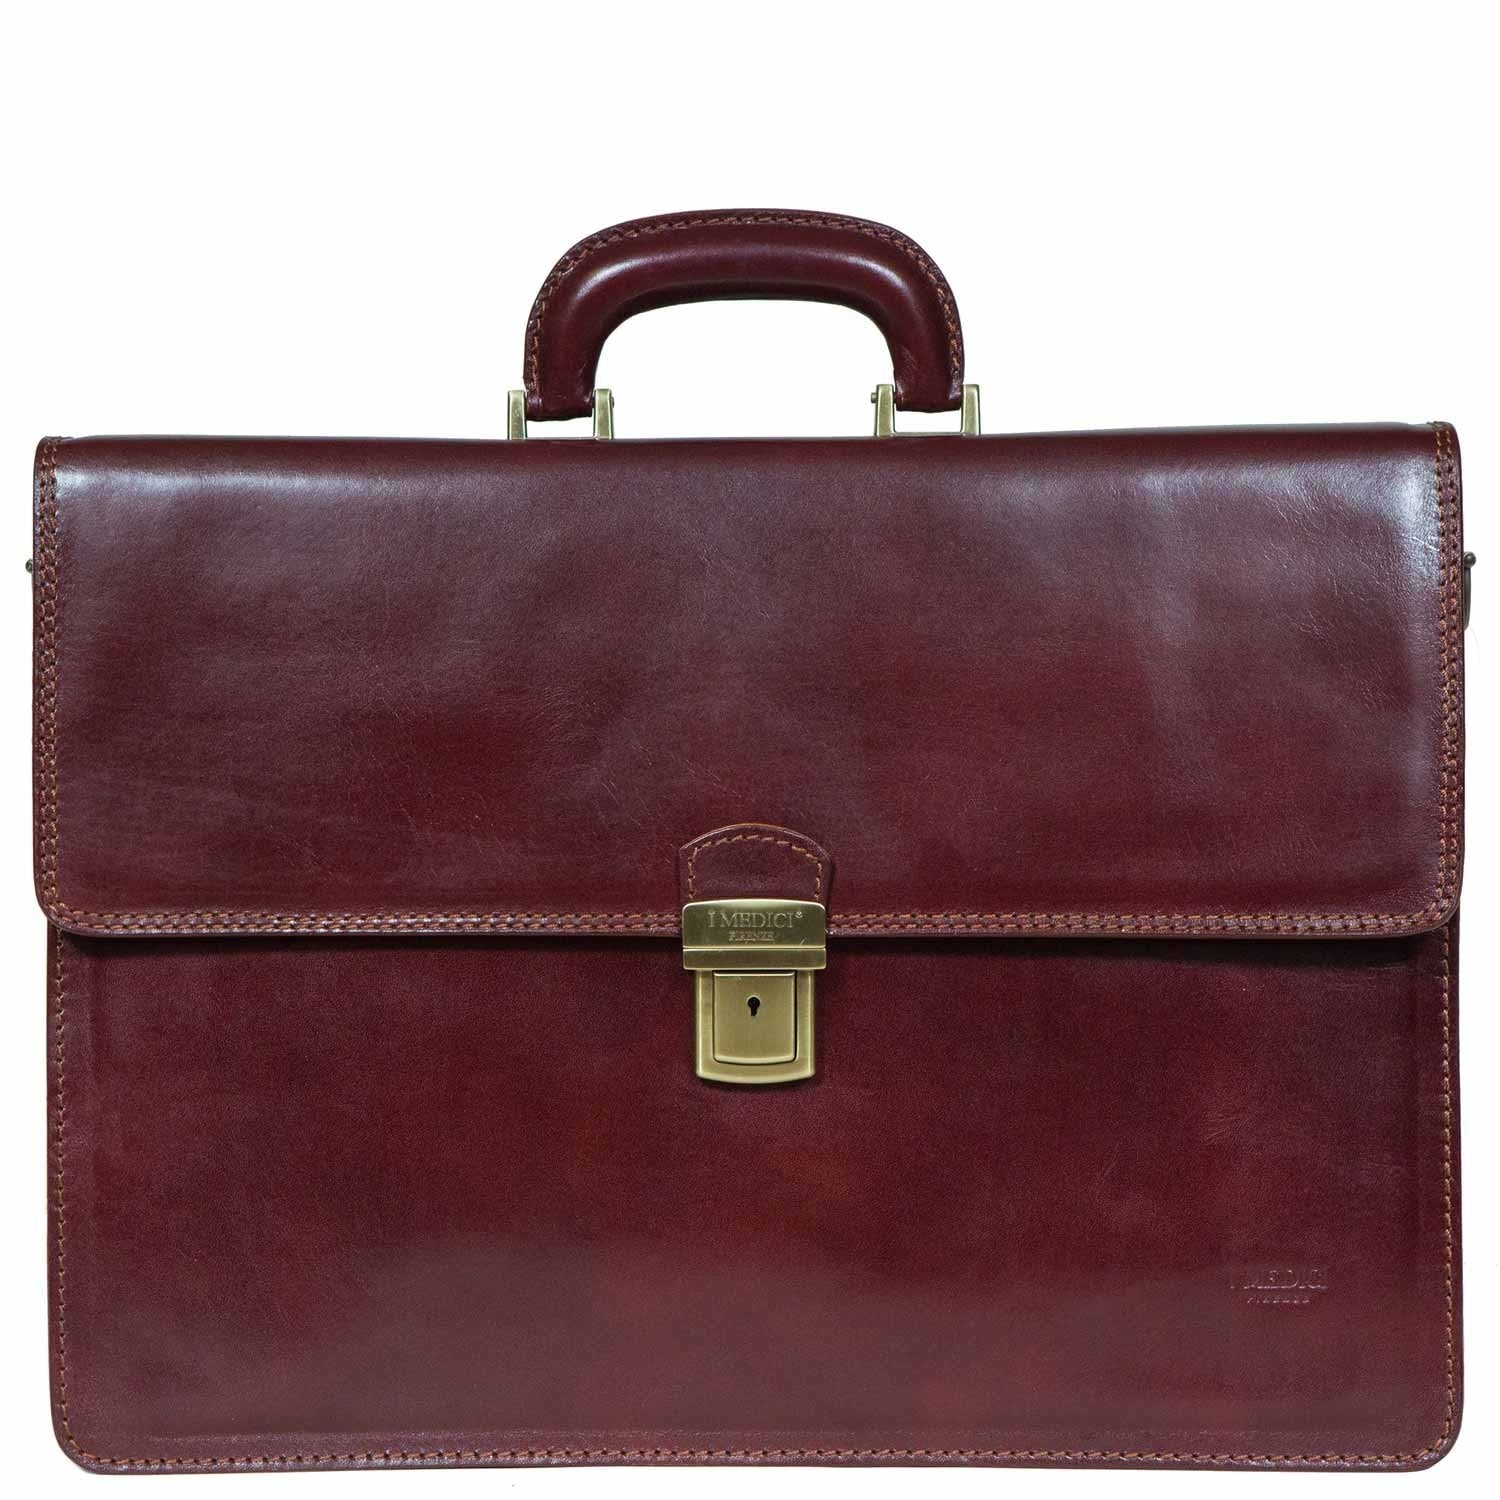 CEO leather briefcase